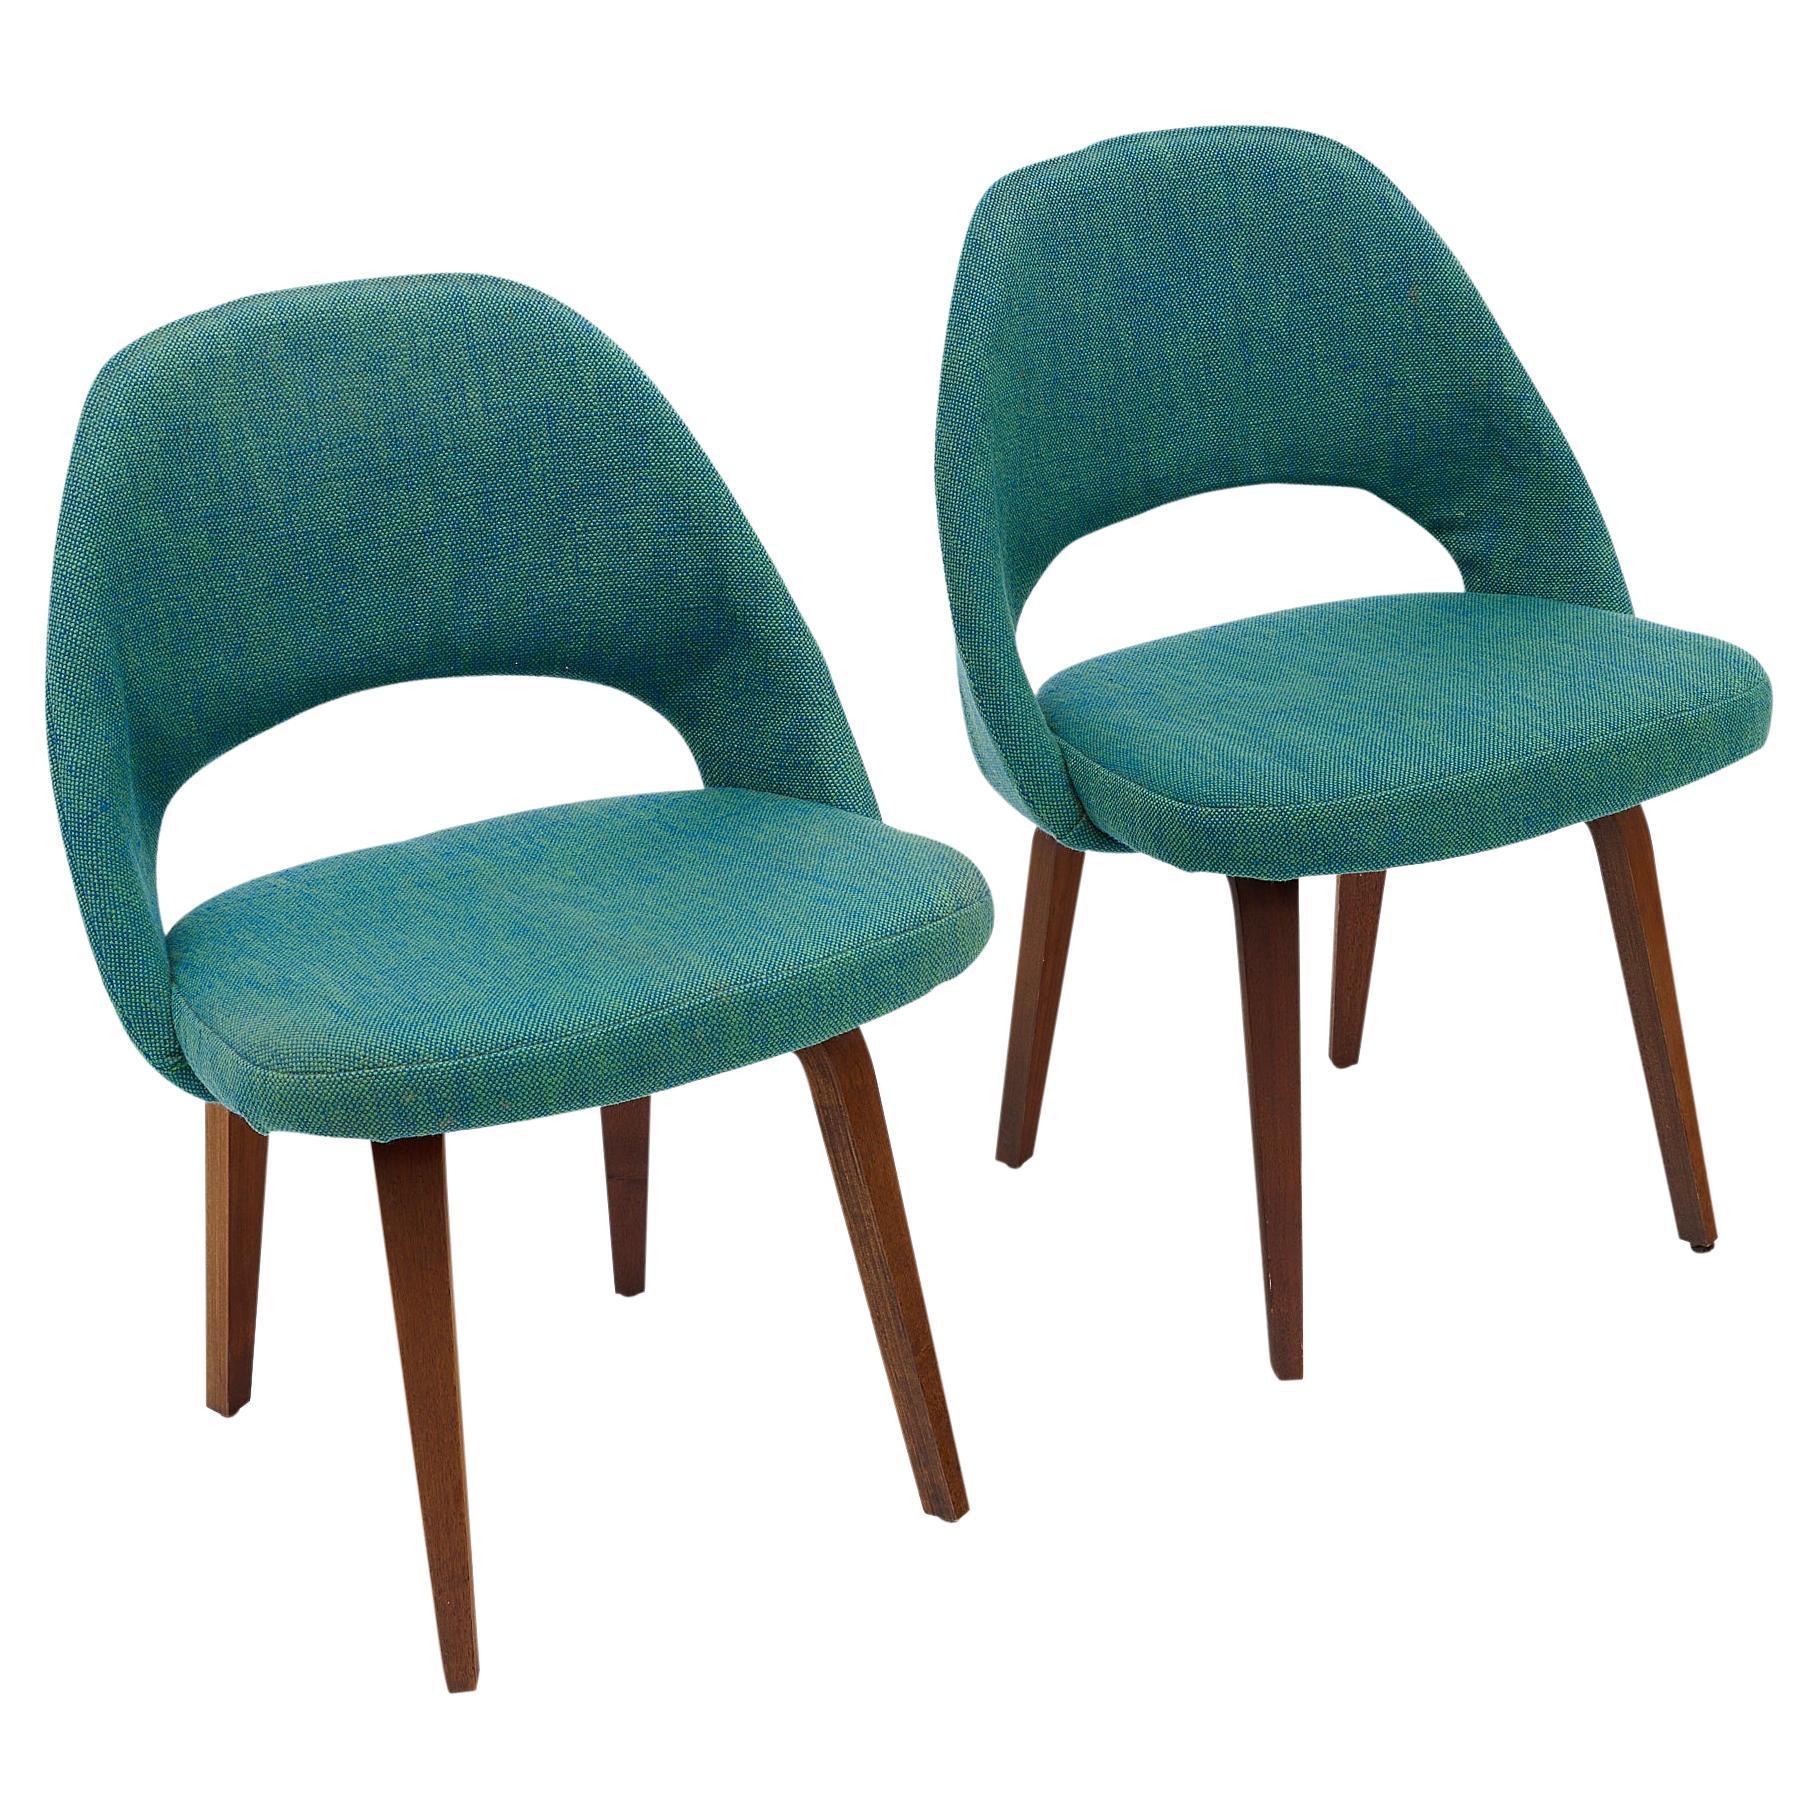 Vintage Pair of Knoll Saarinen Executive Chairs For Sale